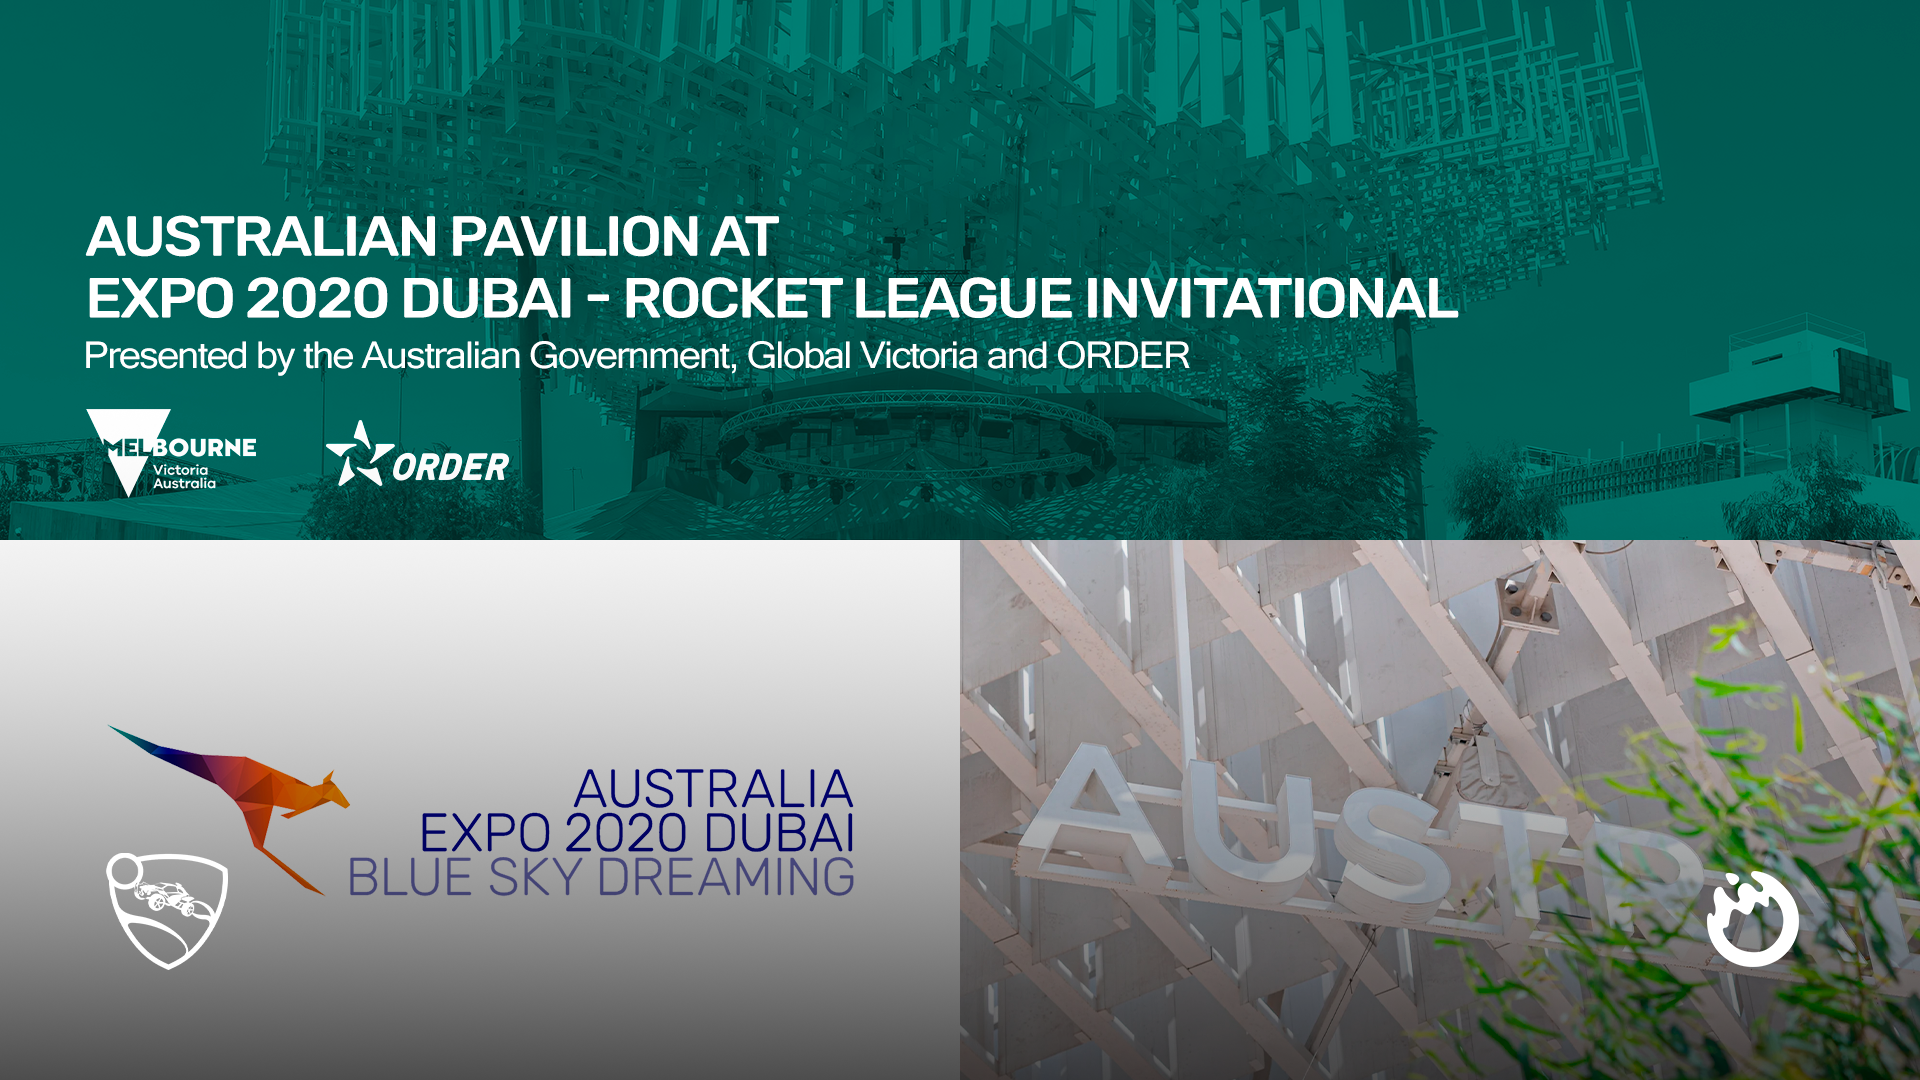 Order partners with the Australian & Victorian Governments with Expo 2020 Rocket League Invitational in Dubai